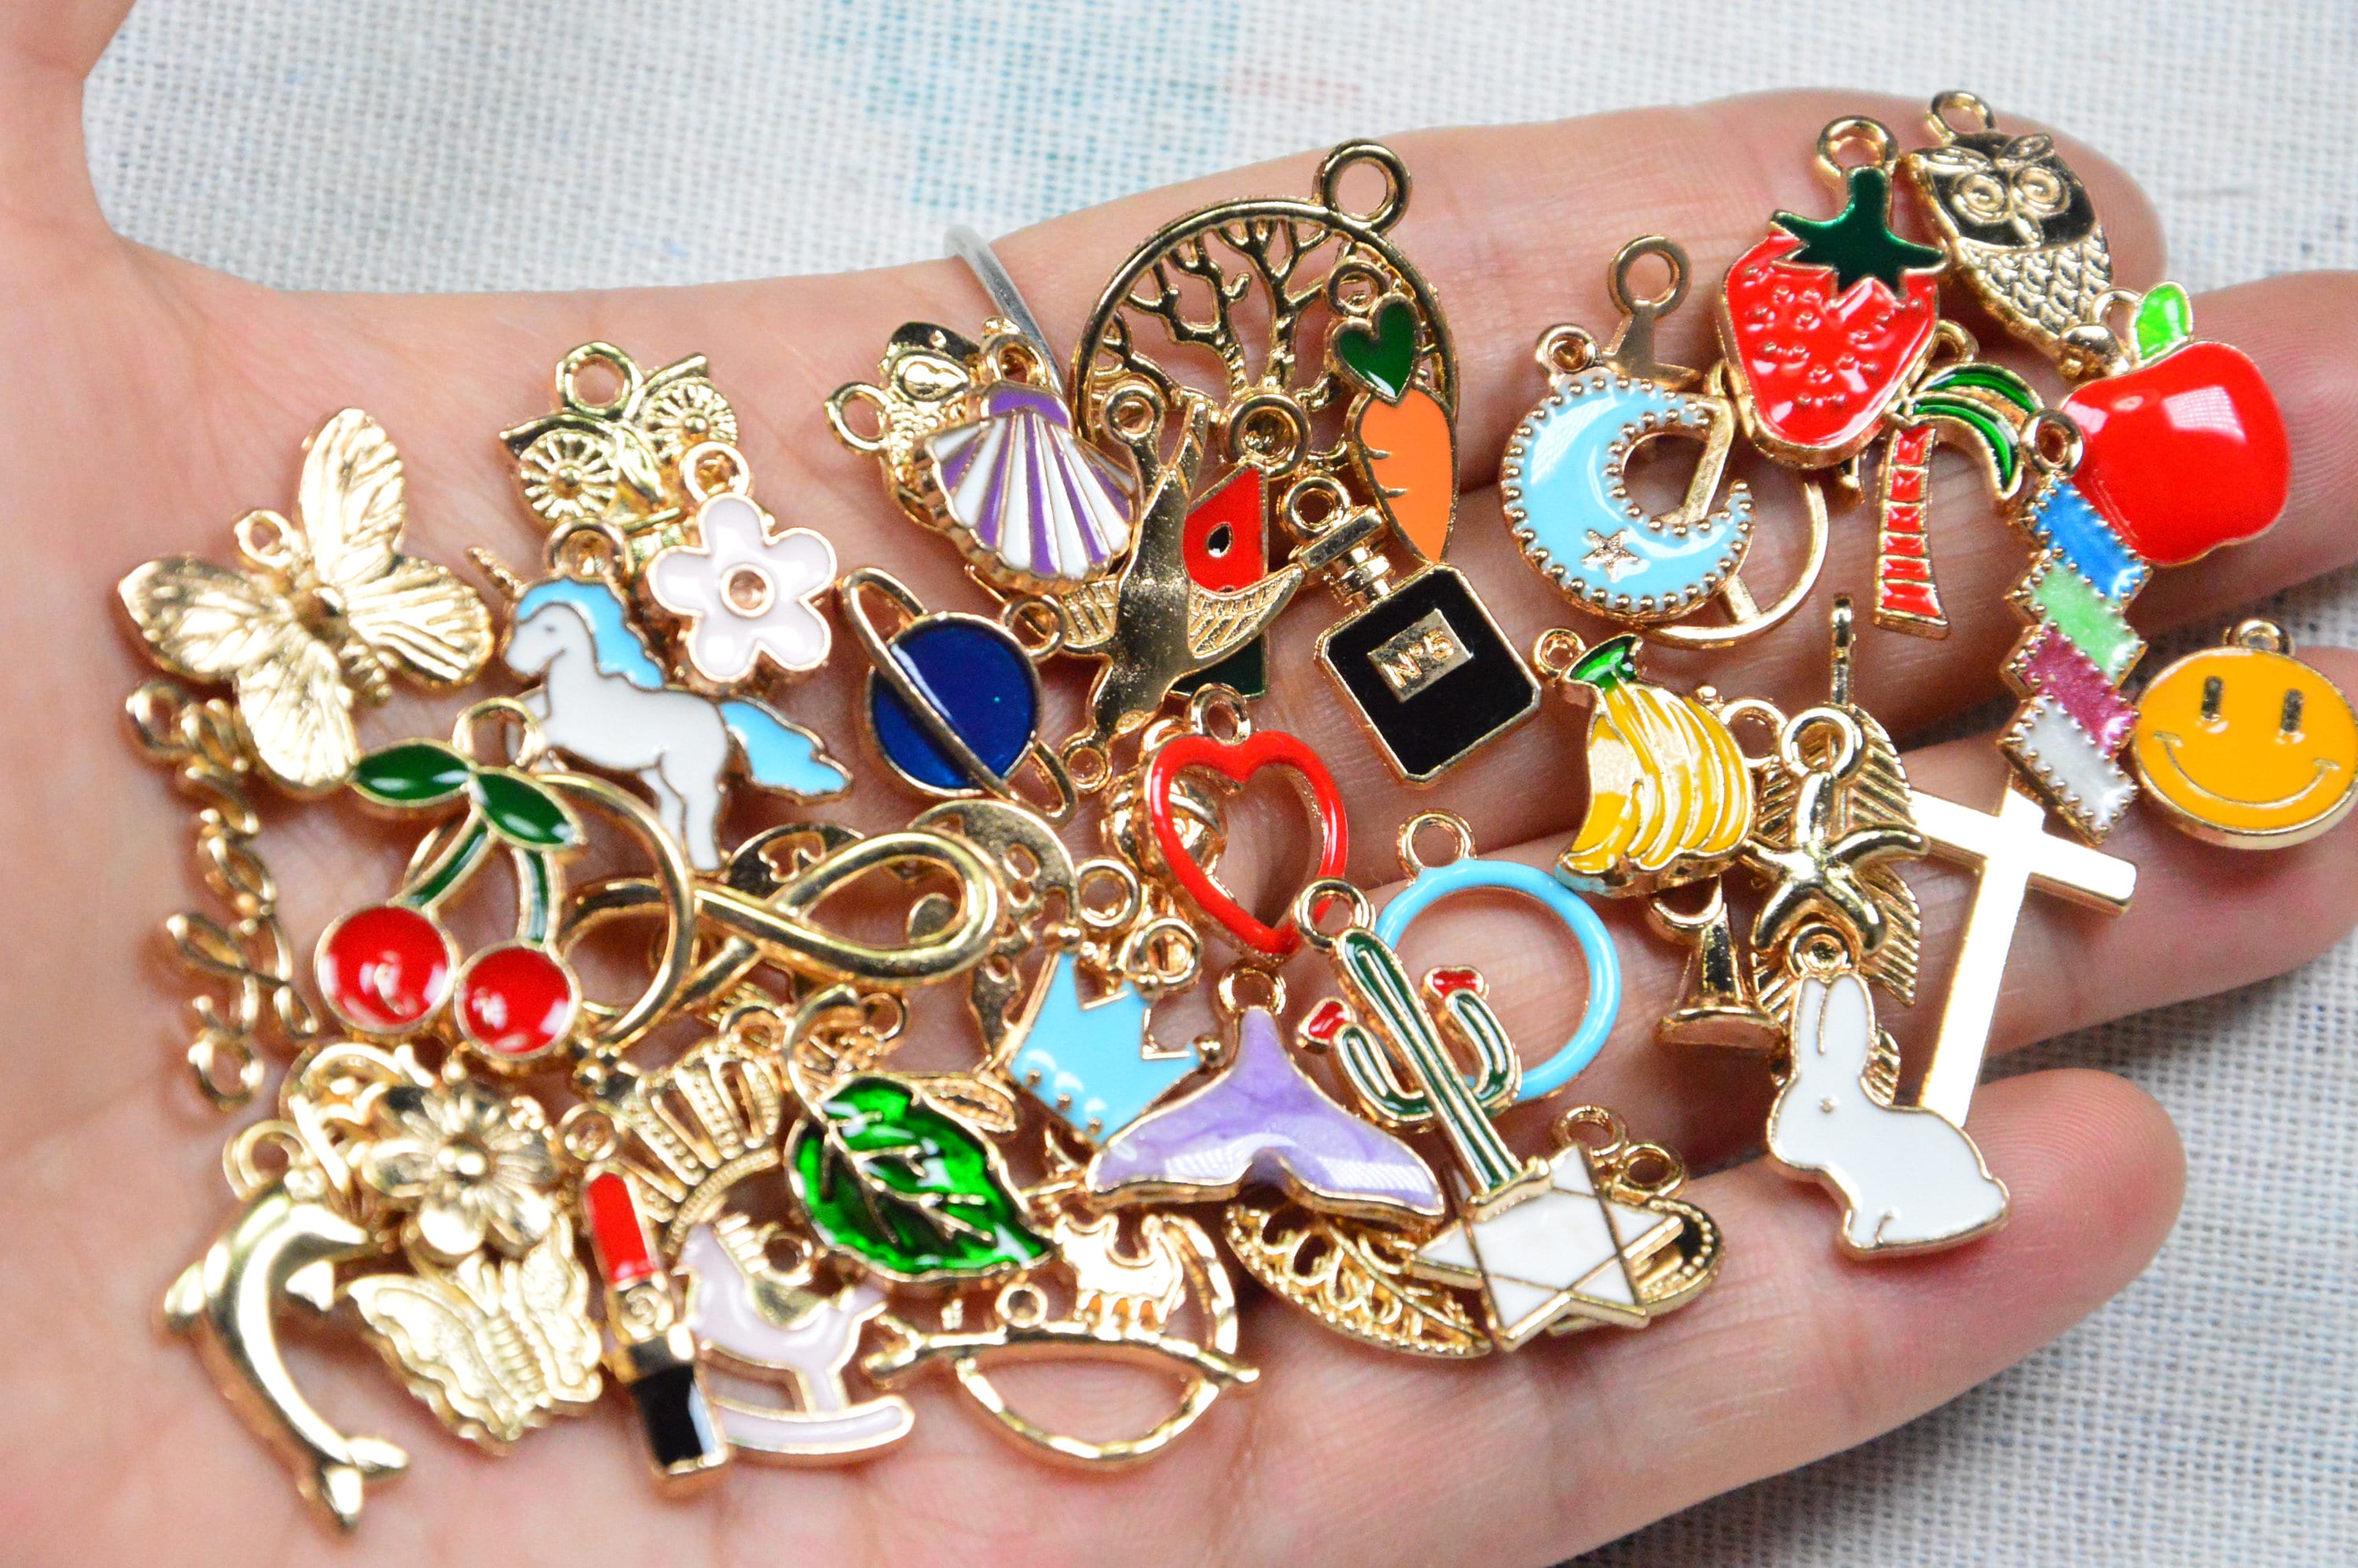 Assorted 50 Enamel charms gold metal charms, small alloy jewelry charms  collection, DIY bracelet charms